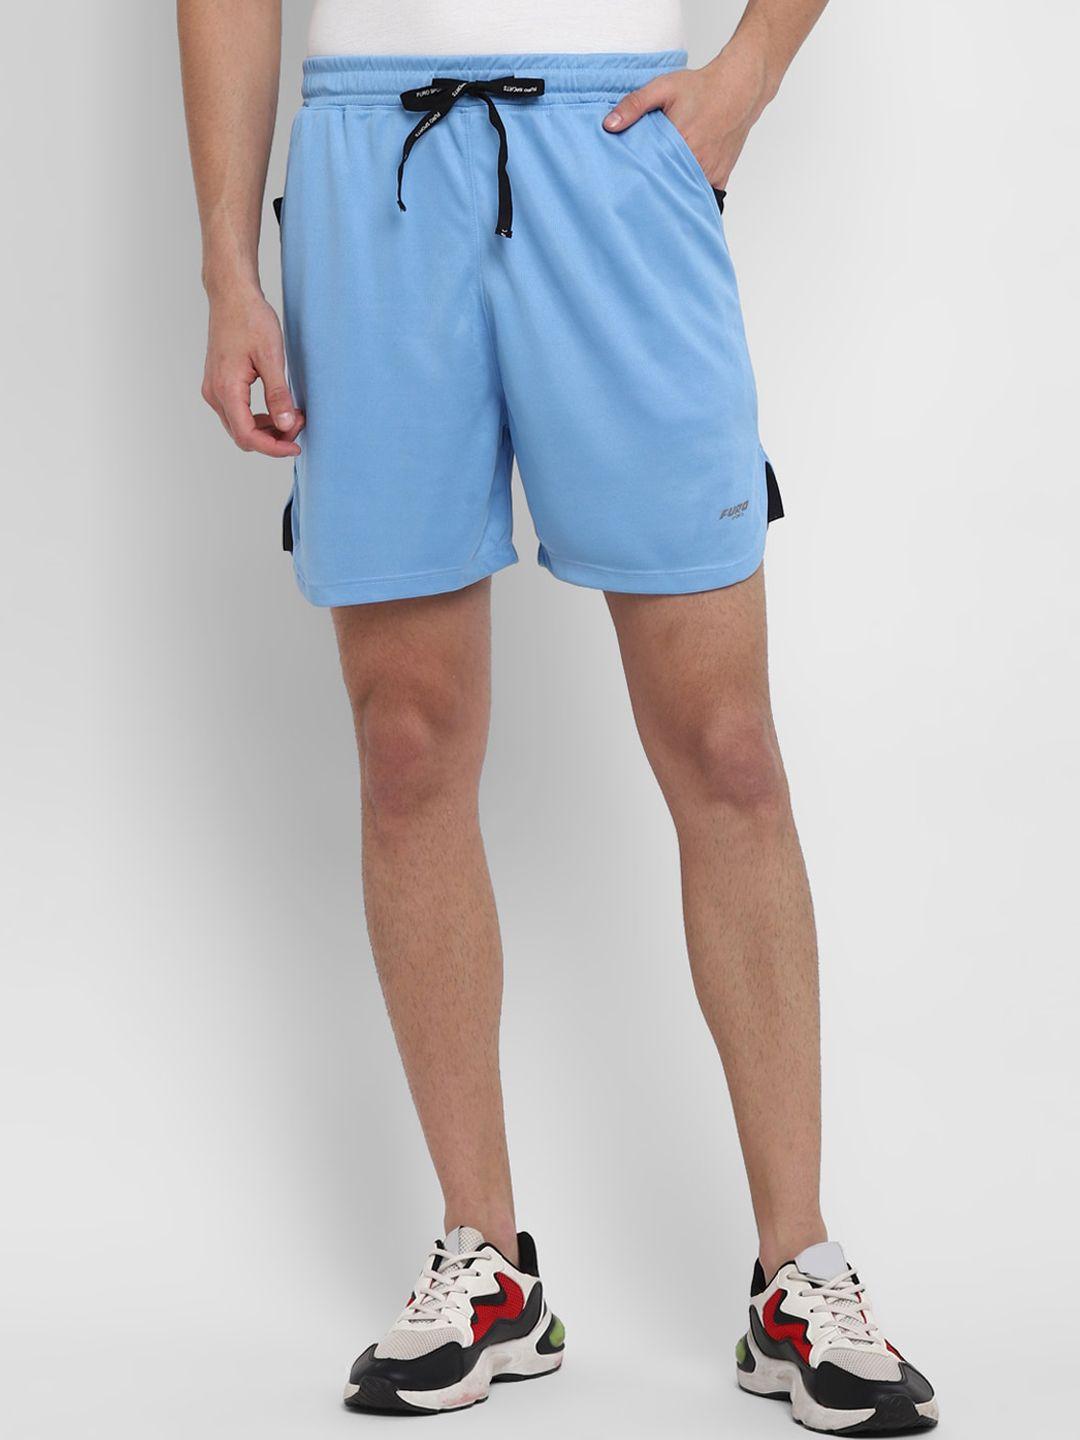 furo-by-red-chief-men-blue-sports-shorts